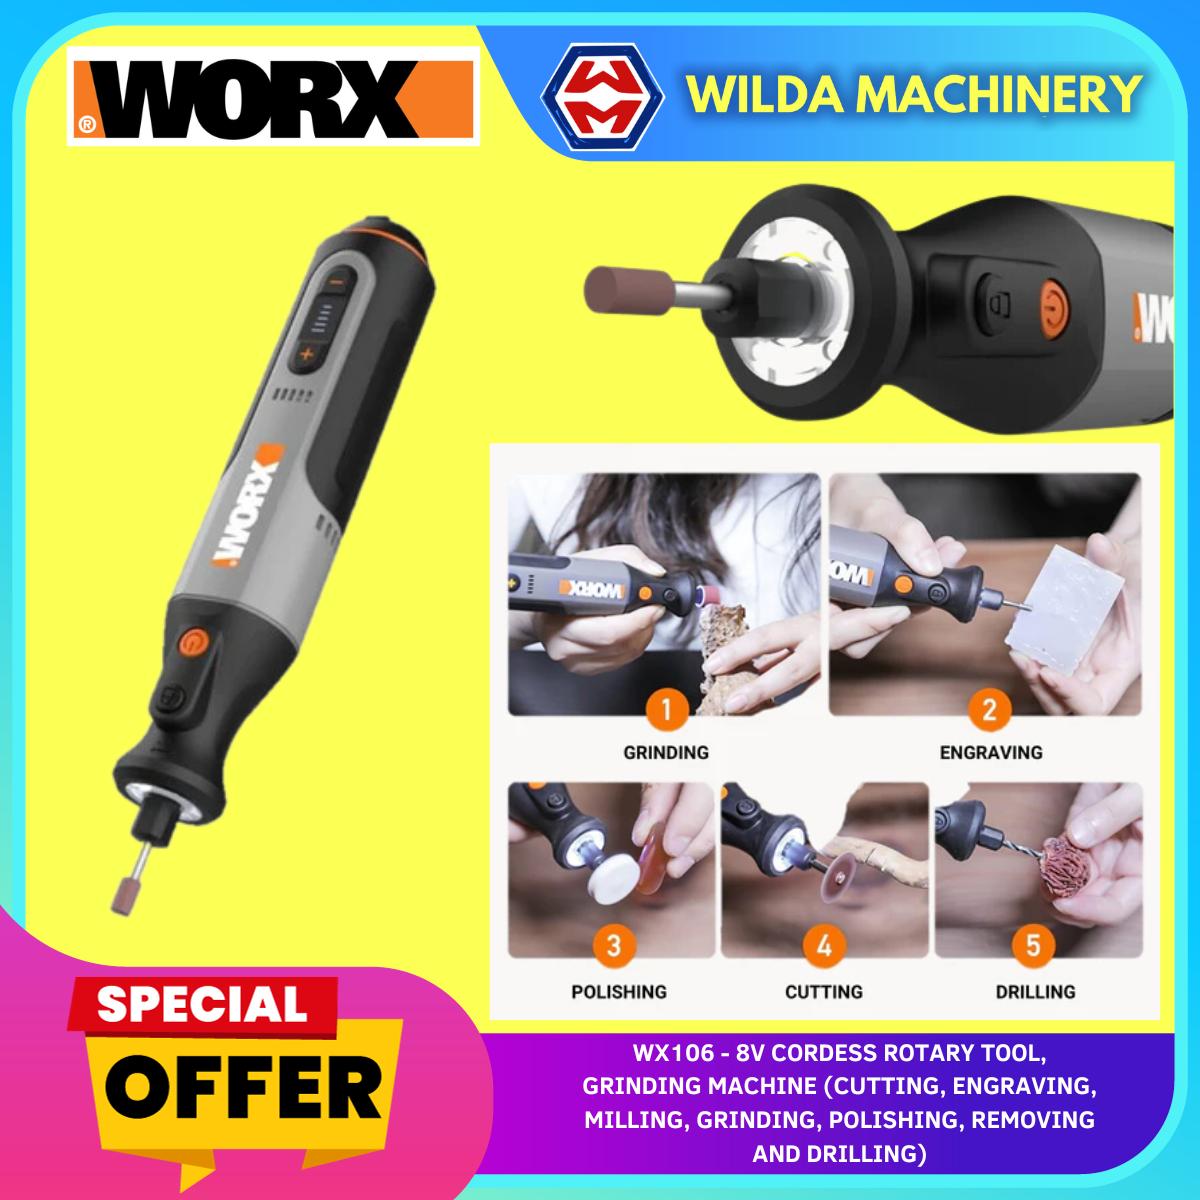 WORX WX106 8V CORDLESS Rotary Tool, Grinding Machine for cutting, engraving, milling, grinding, polishing, removing and drilling